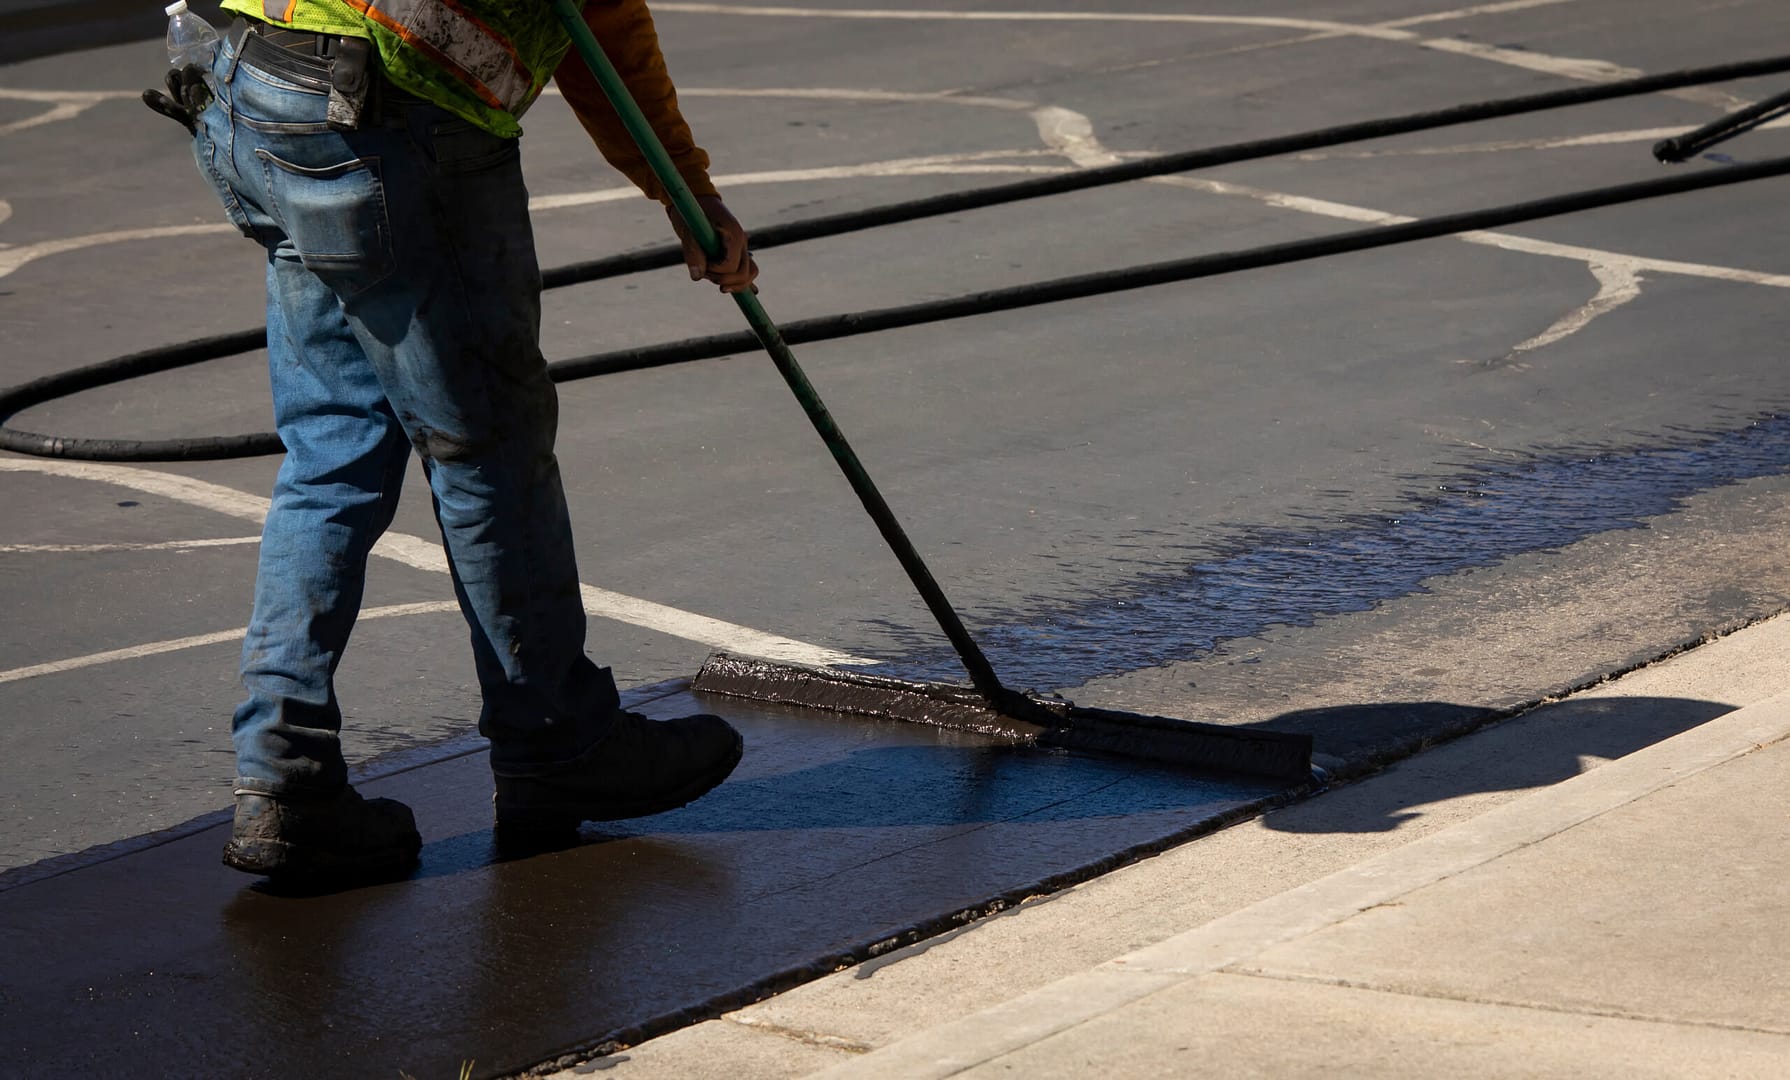 Technician applying slurry sealant on a road, illustrating the advanced maintenance techniques promoted in paving company marketing.